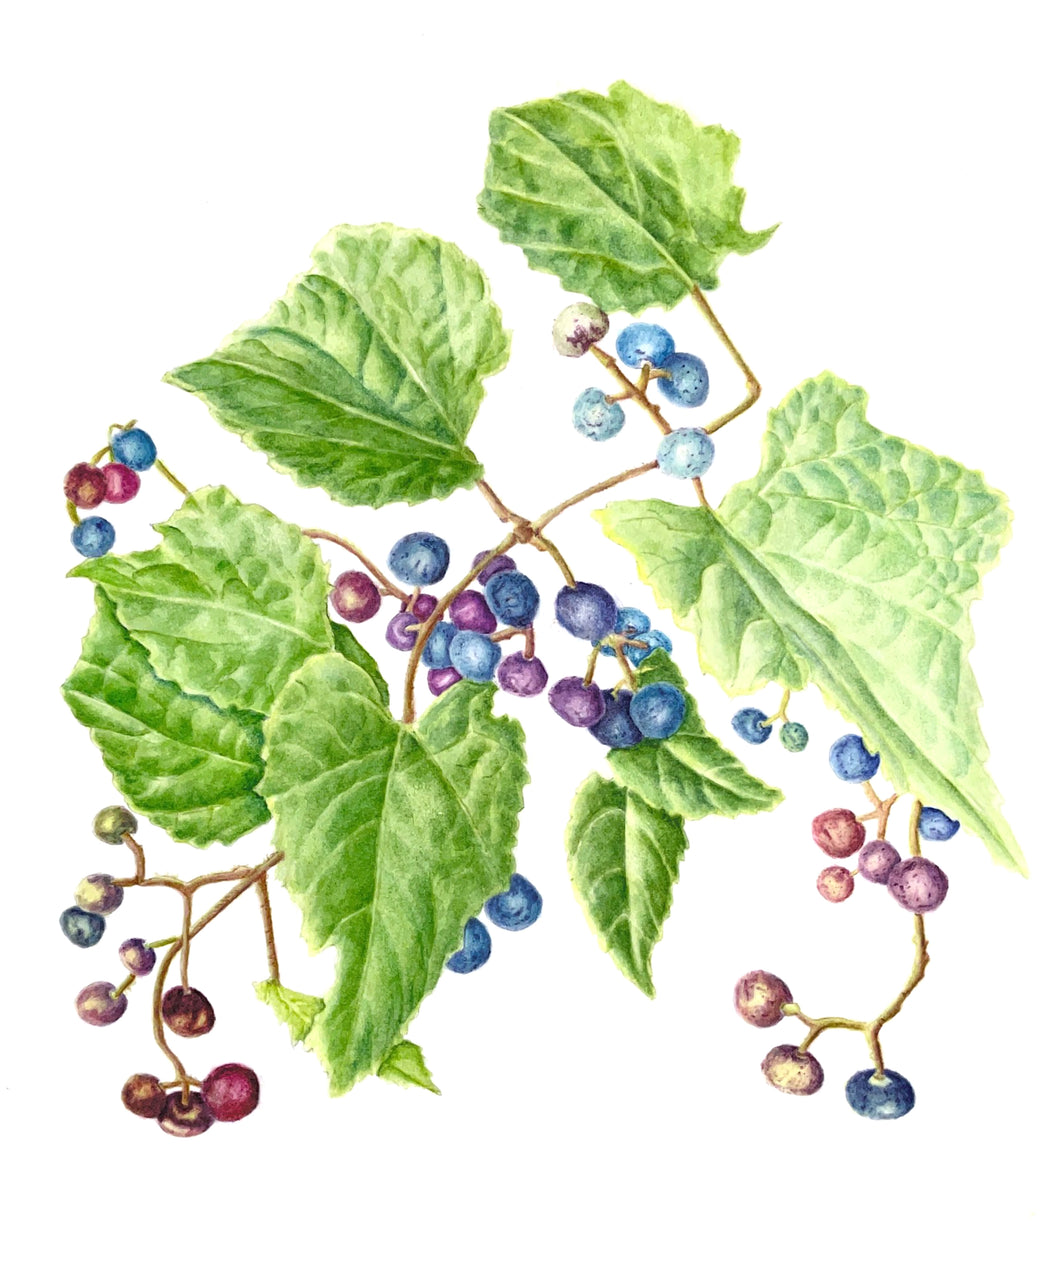 Porcelain Berry Botanical Watercolor Print on Hahnemuhle Paper 11x14 with white mat